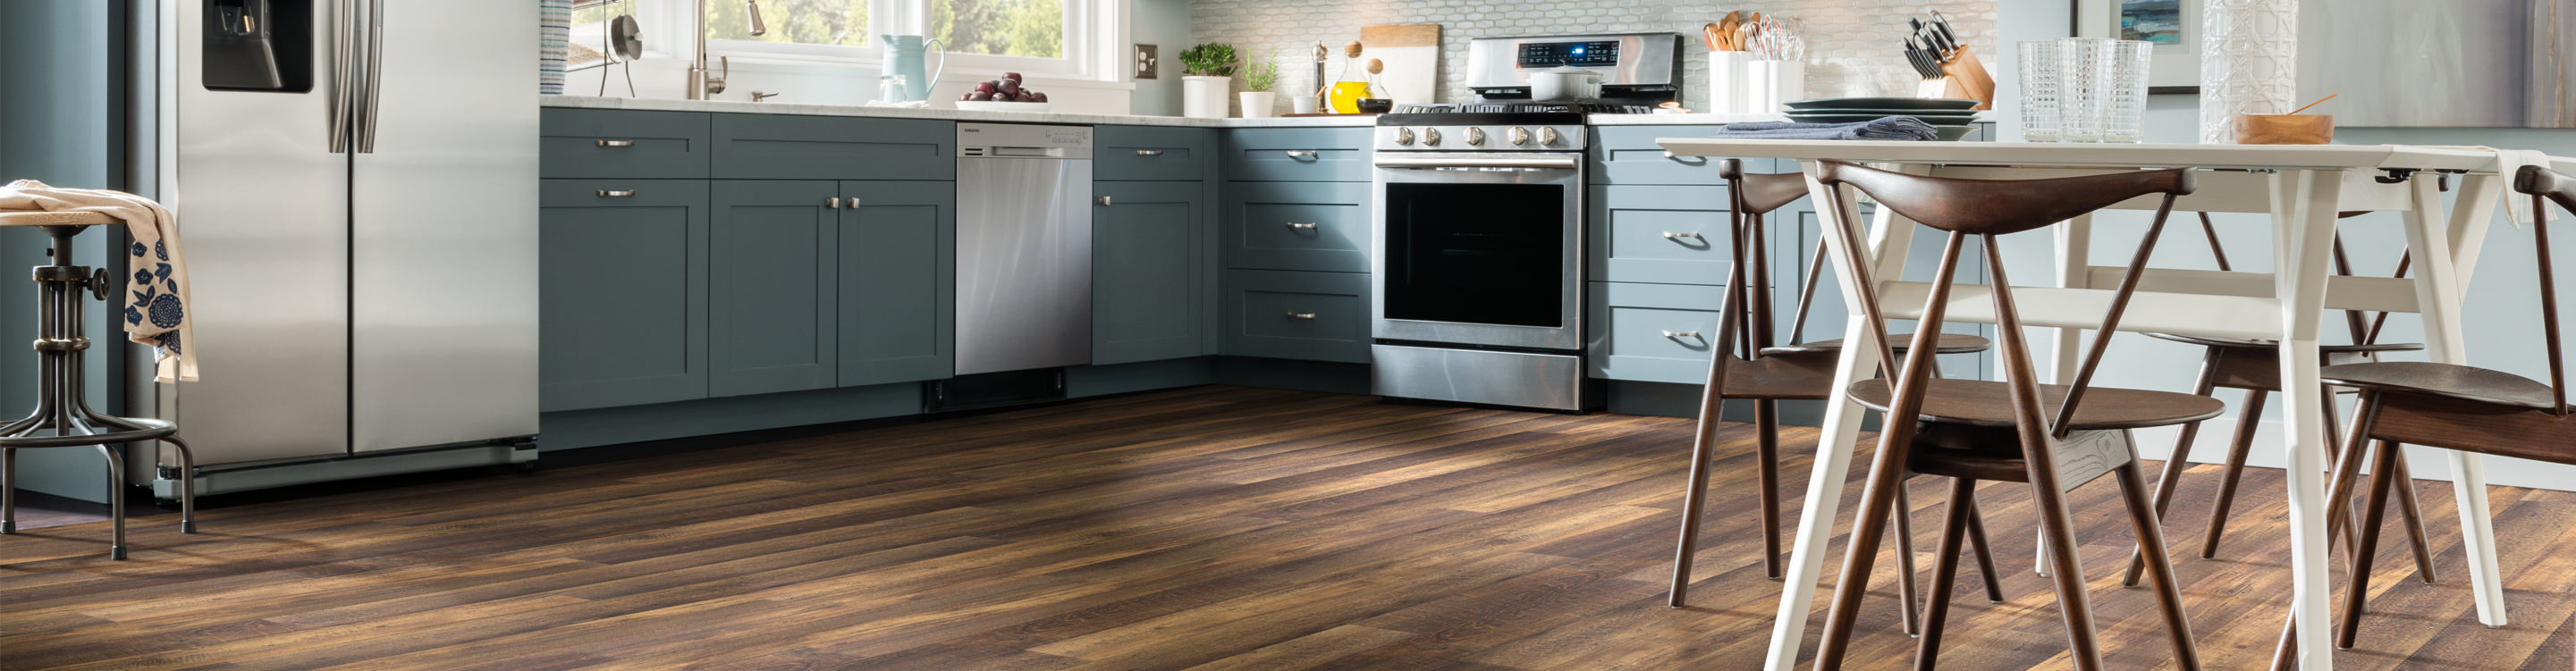 Vinyl plank floor with casual seating, kitchen stainless steel 